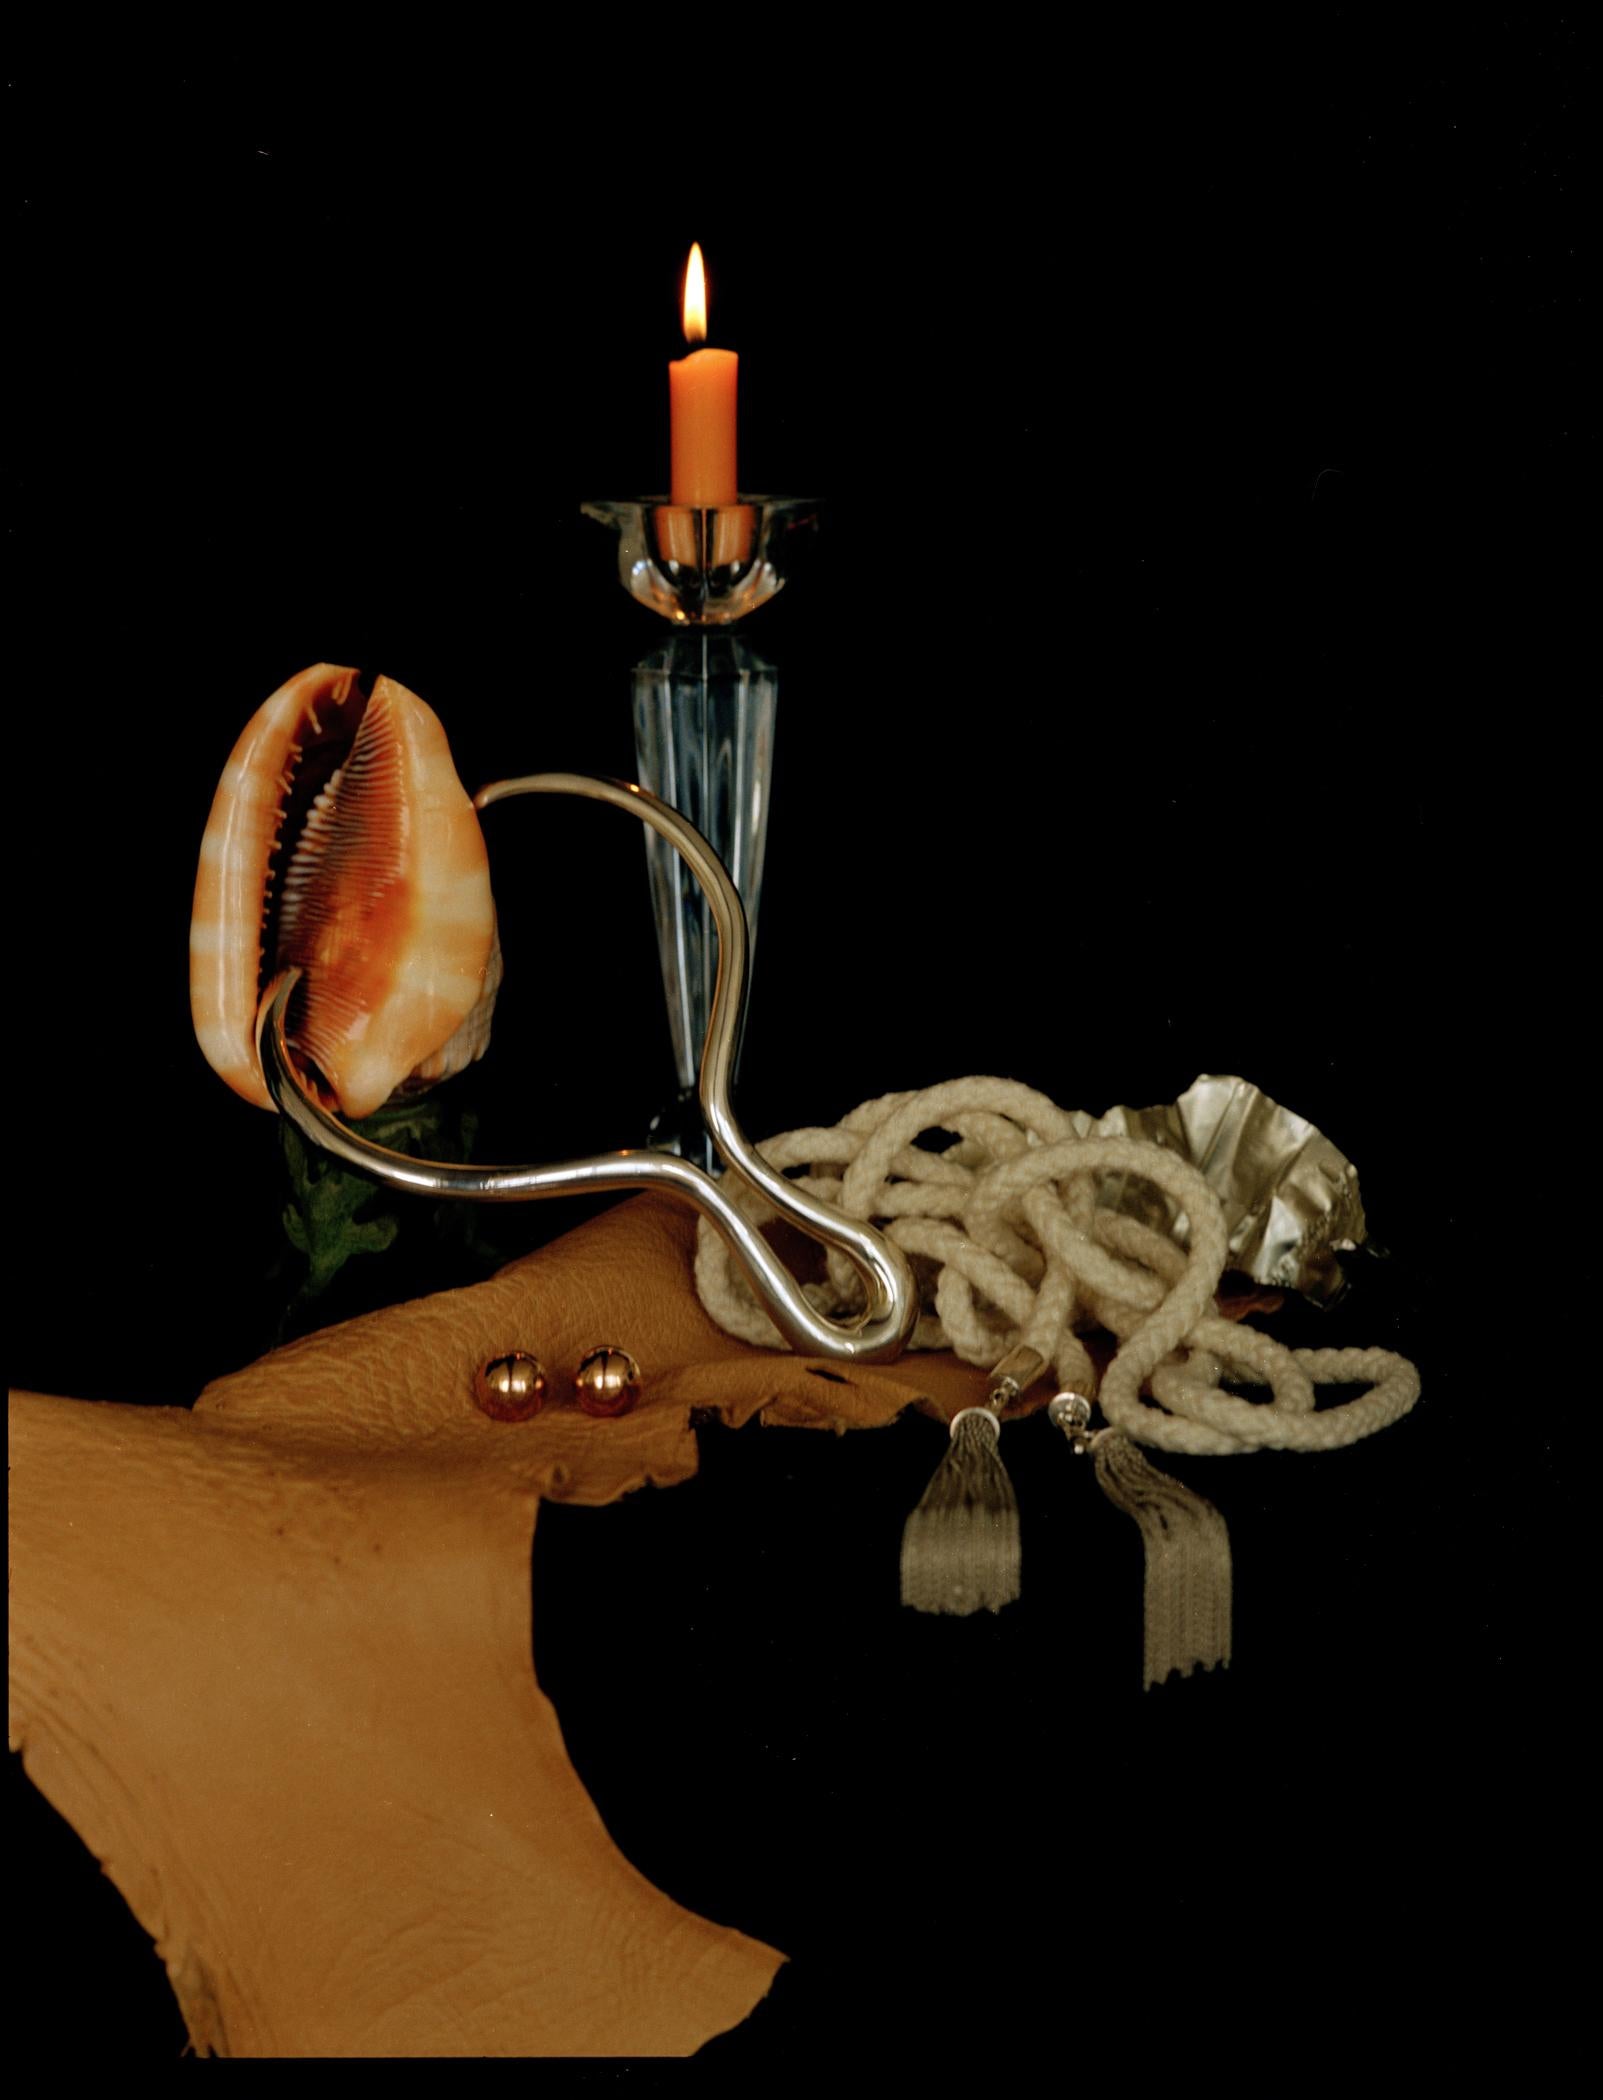 Michael James O’Brien Color Photograph - Still Life with a Shell and a Rope, Paris. Limited edition color photo